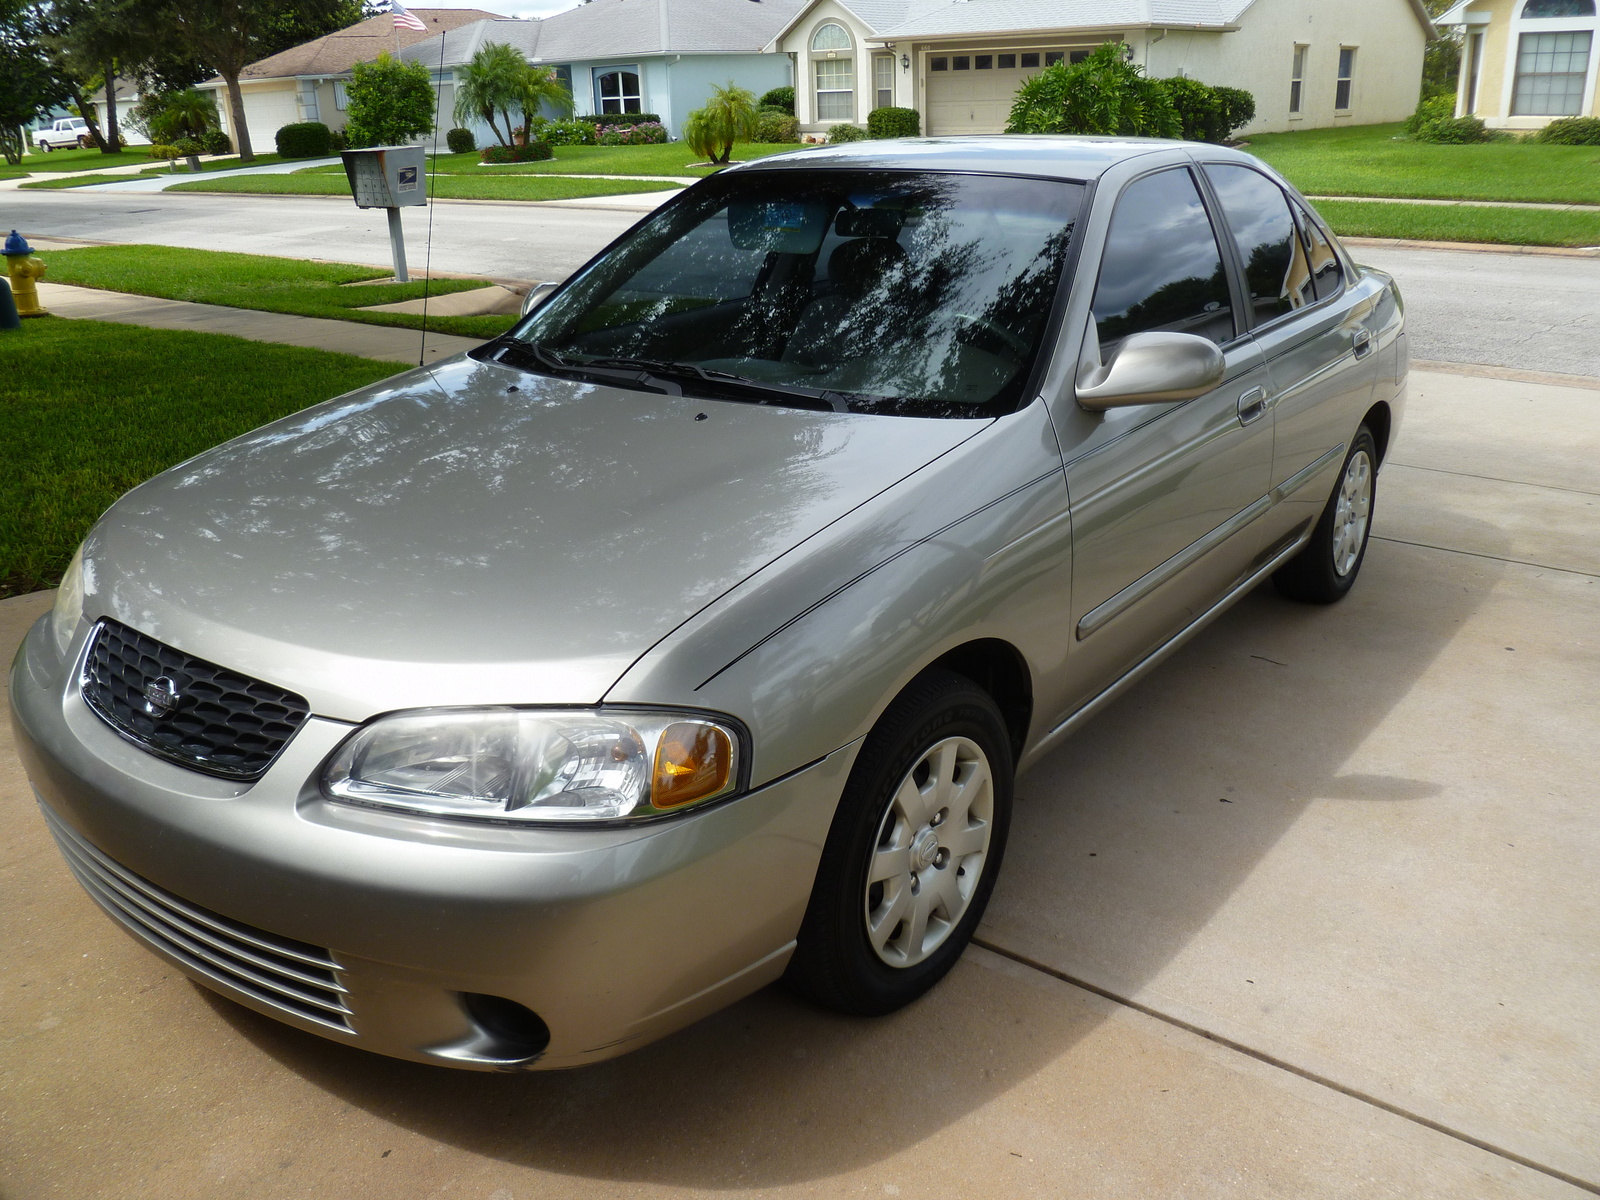 Ratings for 2001 nissan sentra #1